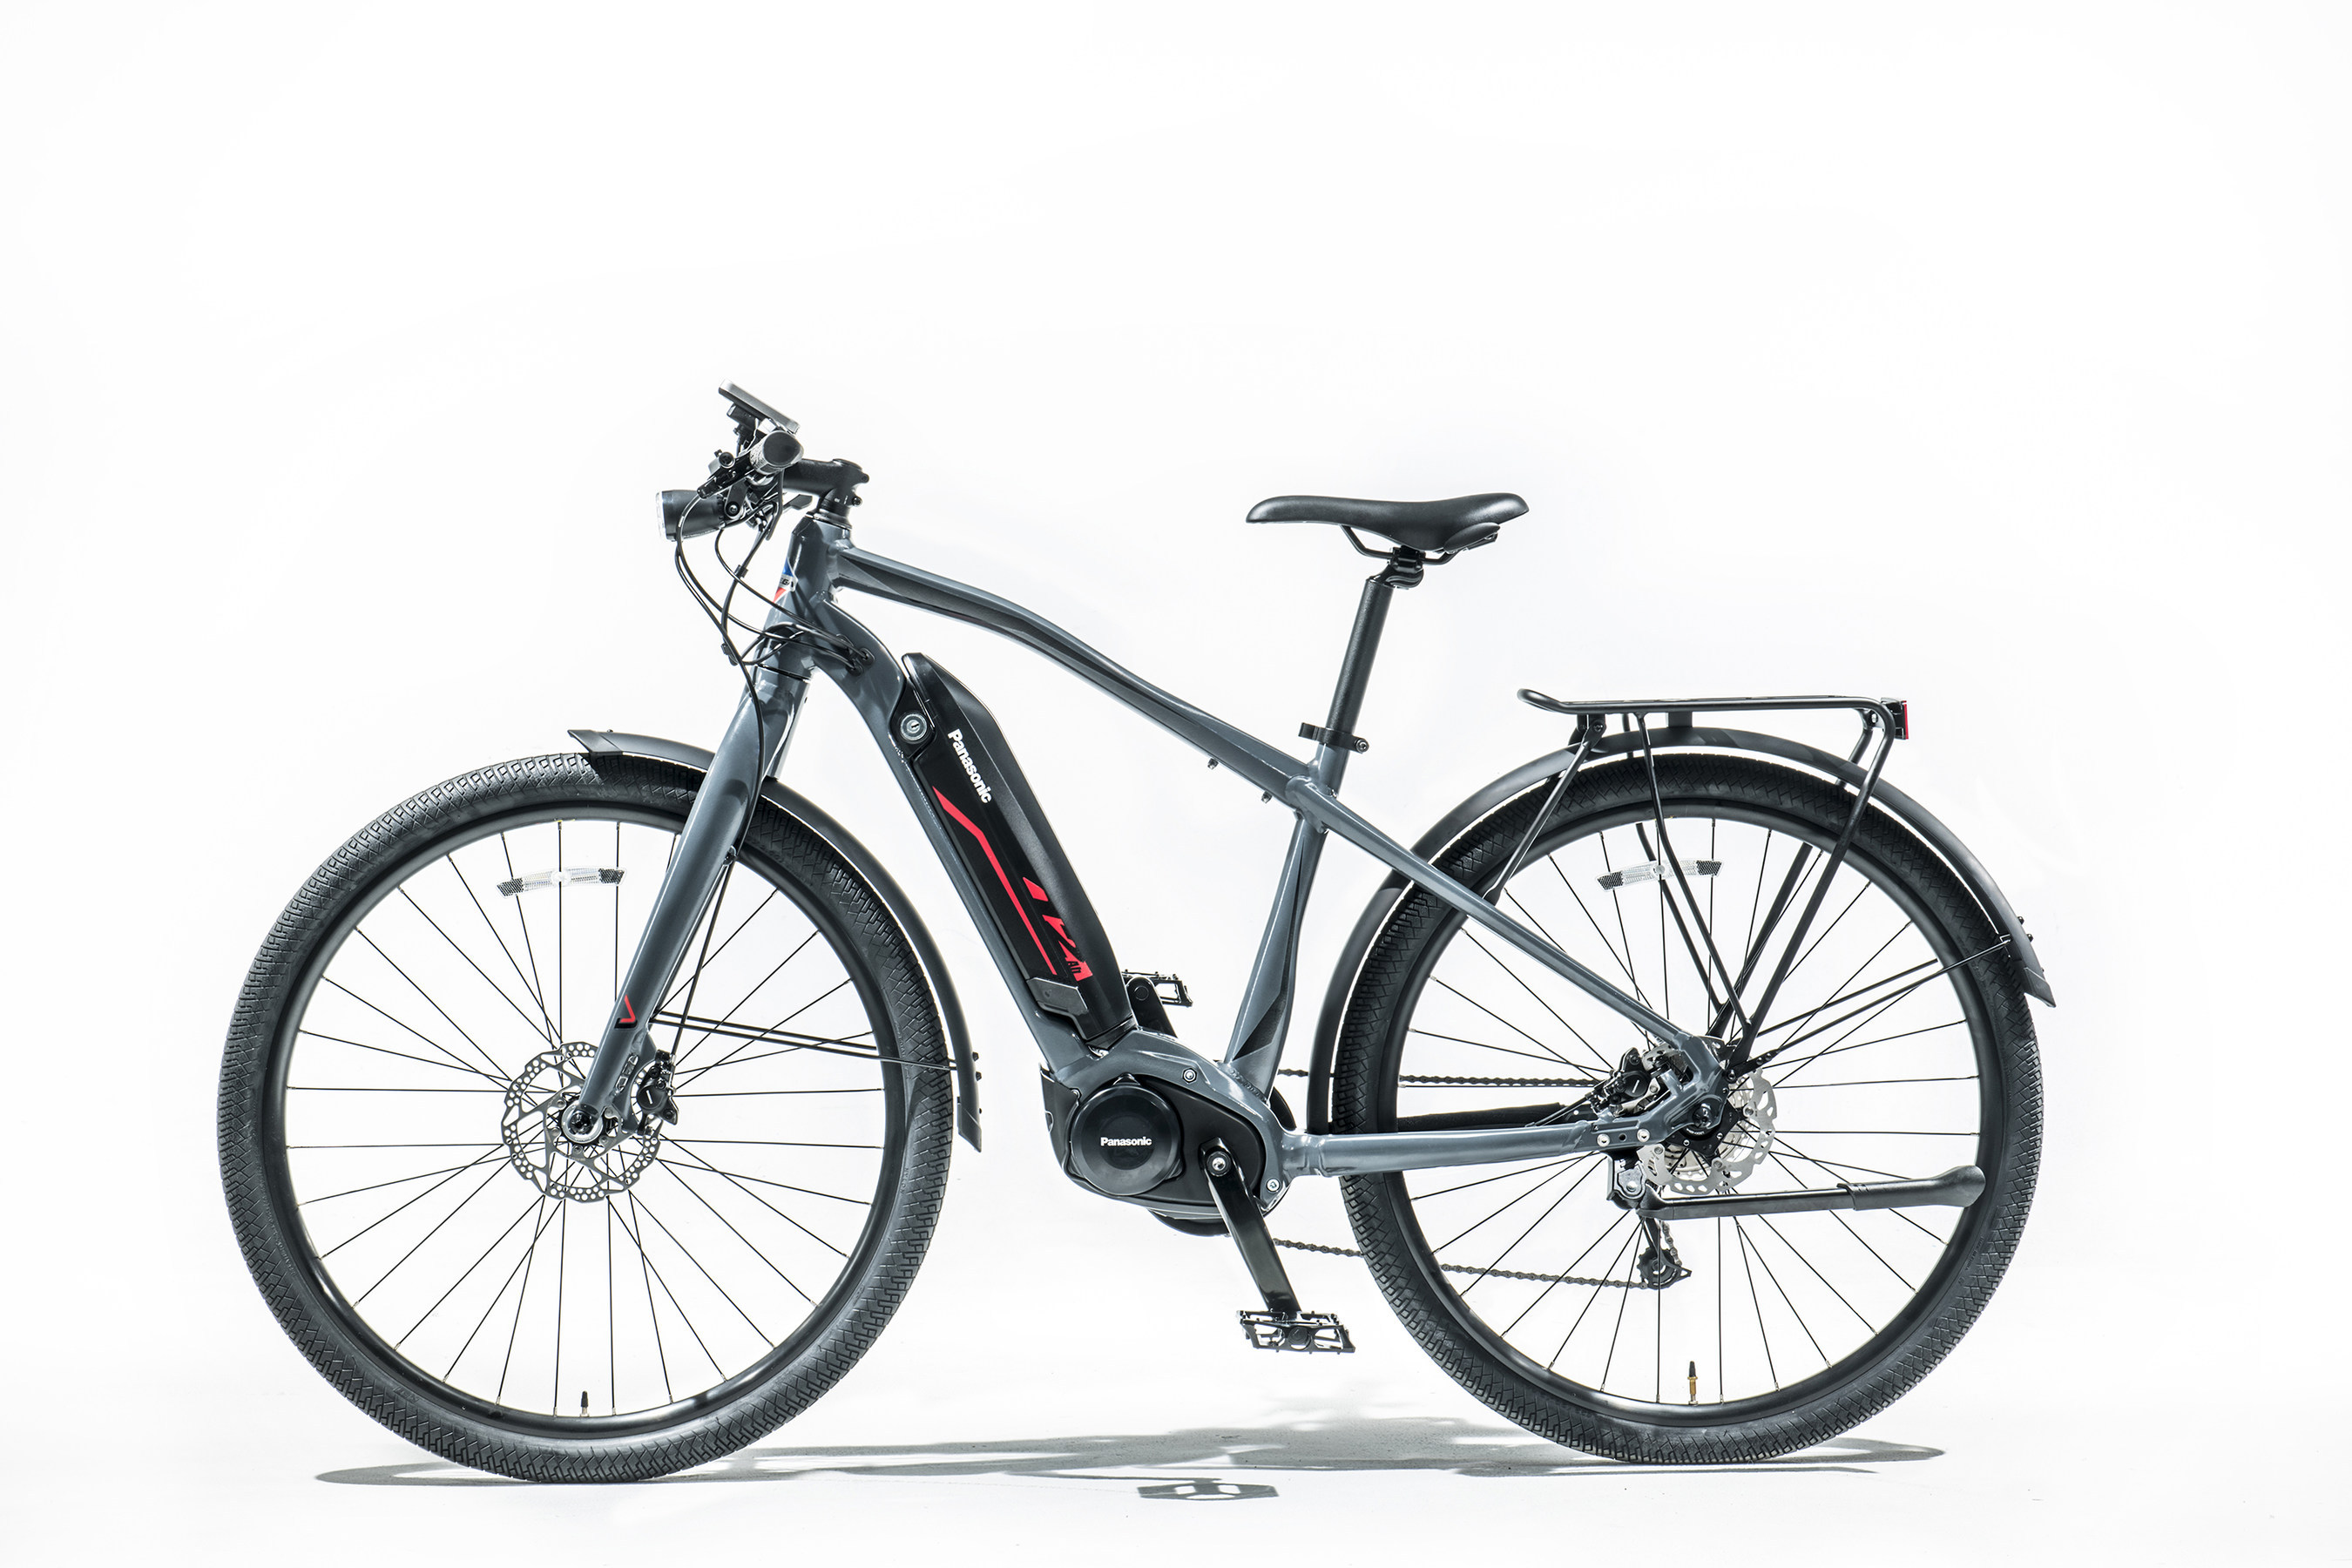 panasonic-launches-new-e-bike-line-in-partnership-with-kent